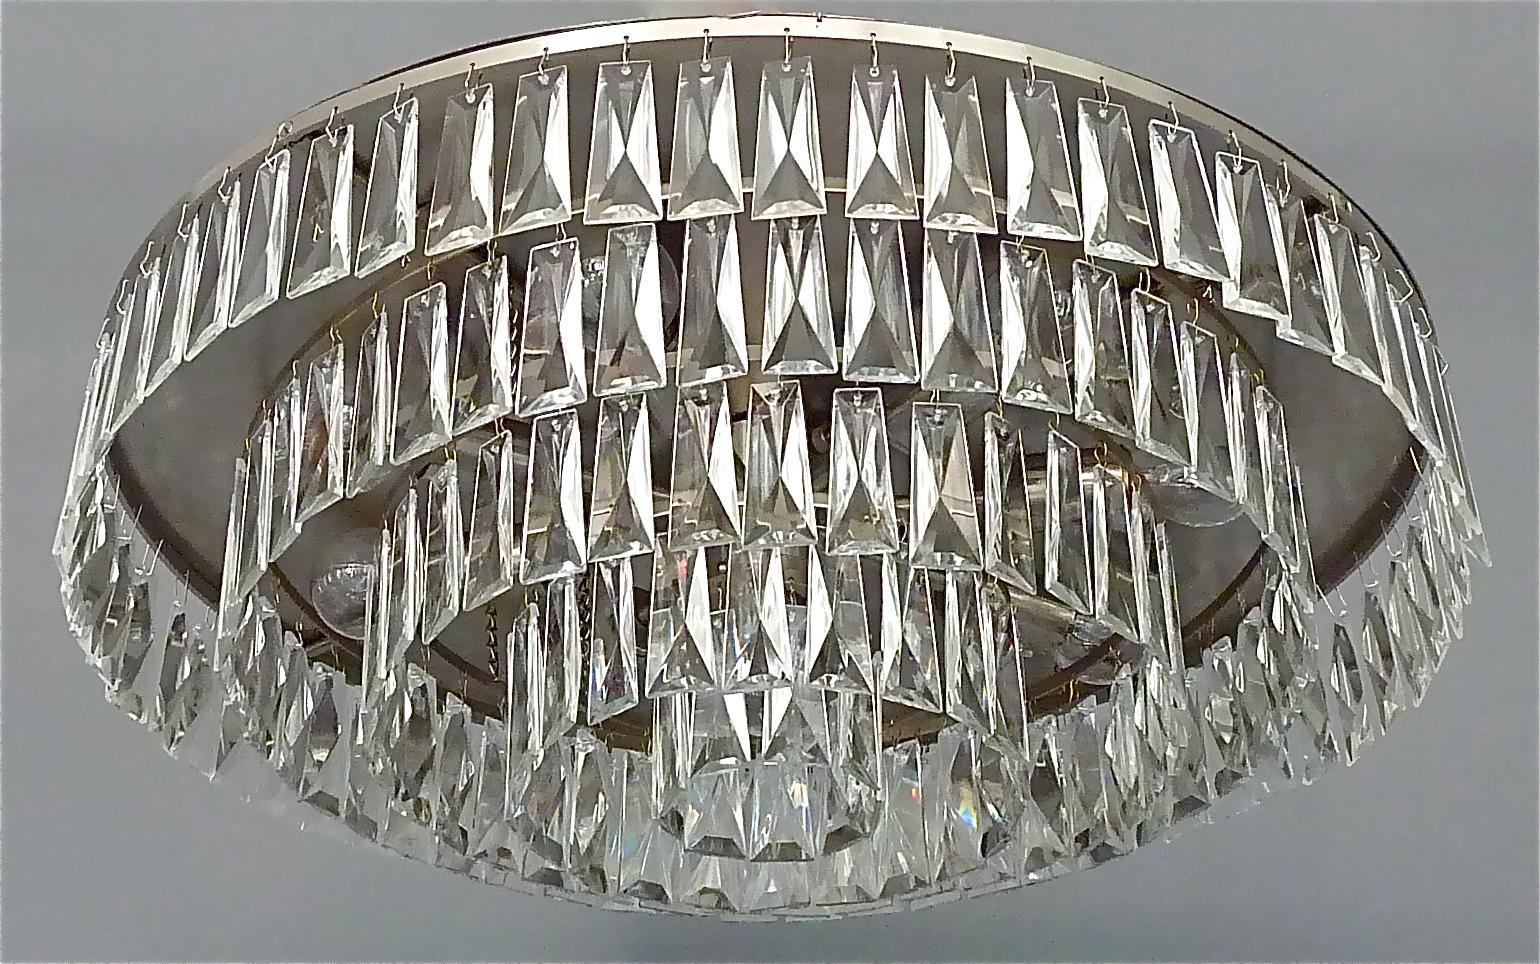 Early and large midcentury Palwa flush mount chandelier or ceiling light, Germany, circa 1960s. The ceiling fixture and the frame are made of brushed stainless steel metal. It has five tiers with handcut faceted crystal glass beads, made of the high